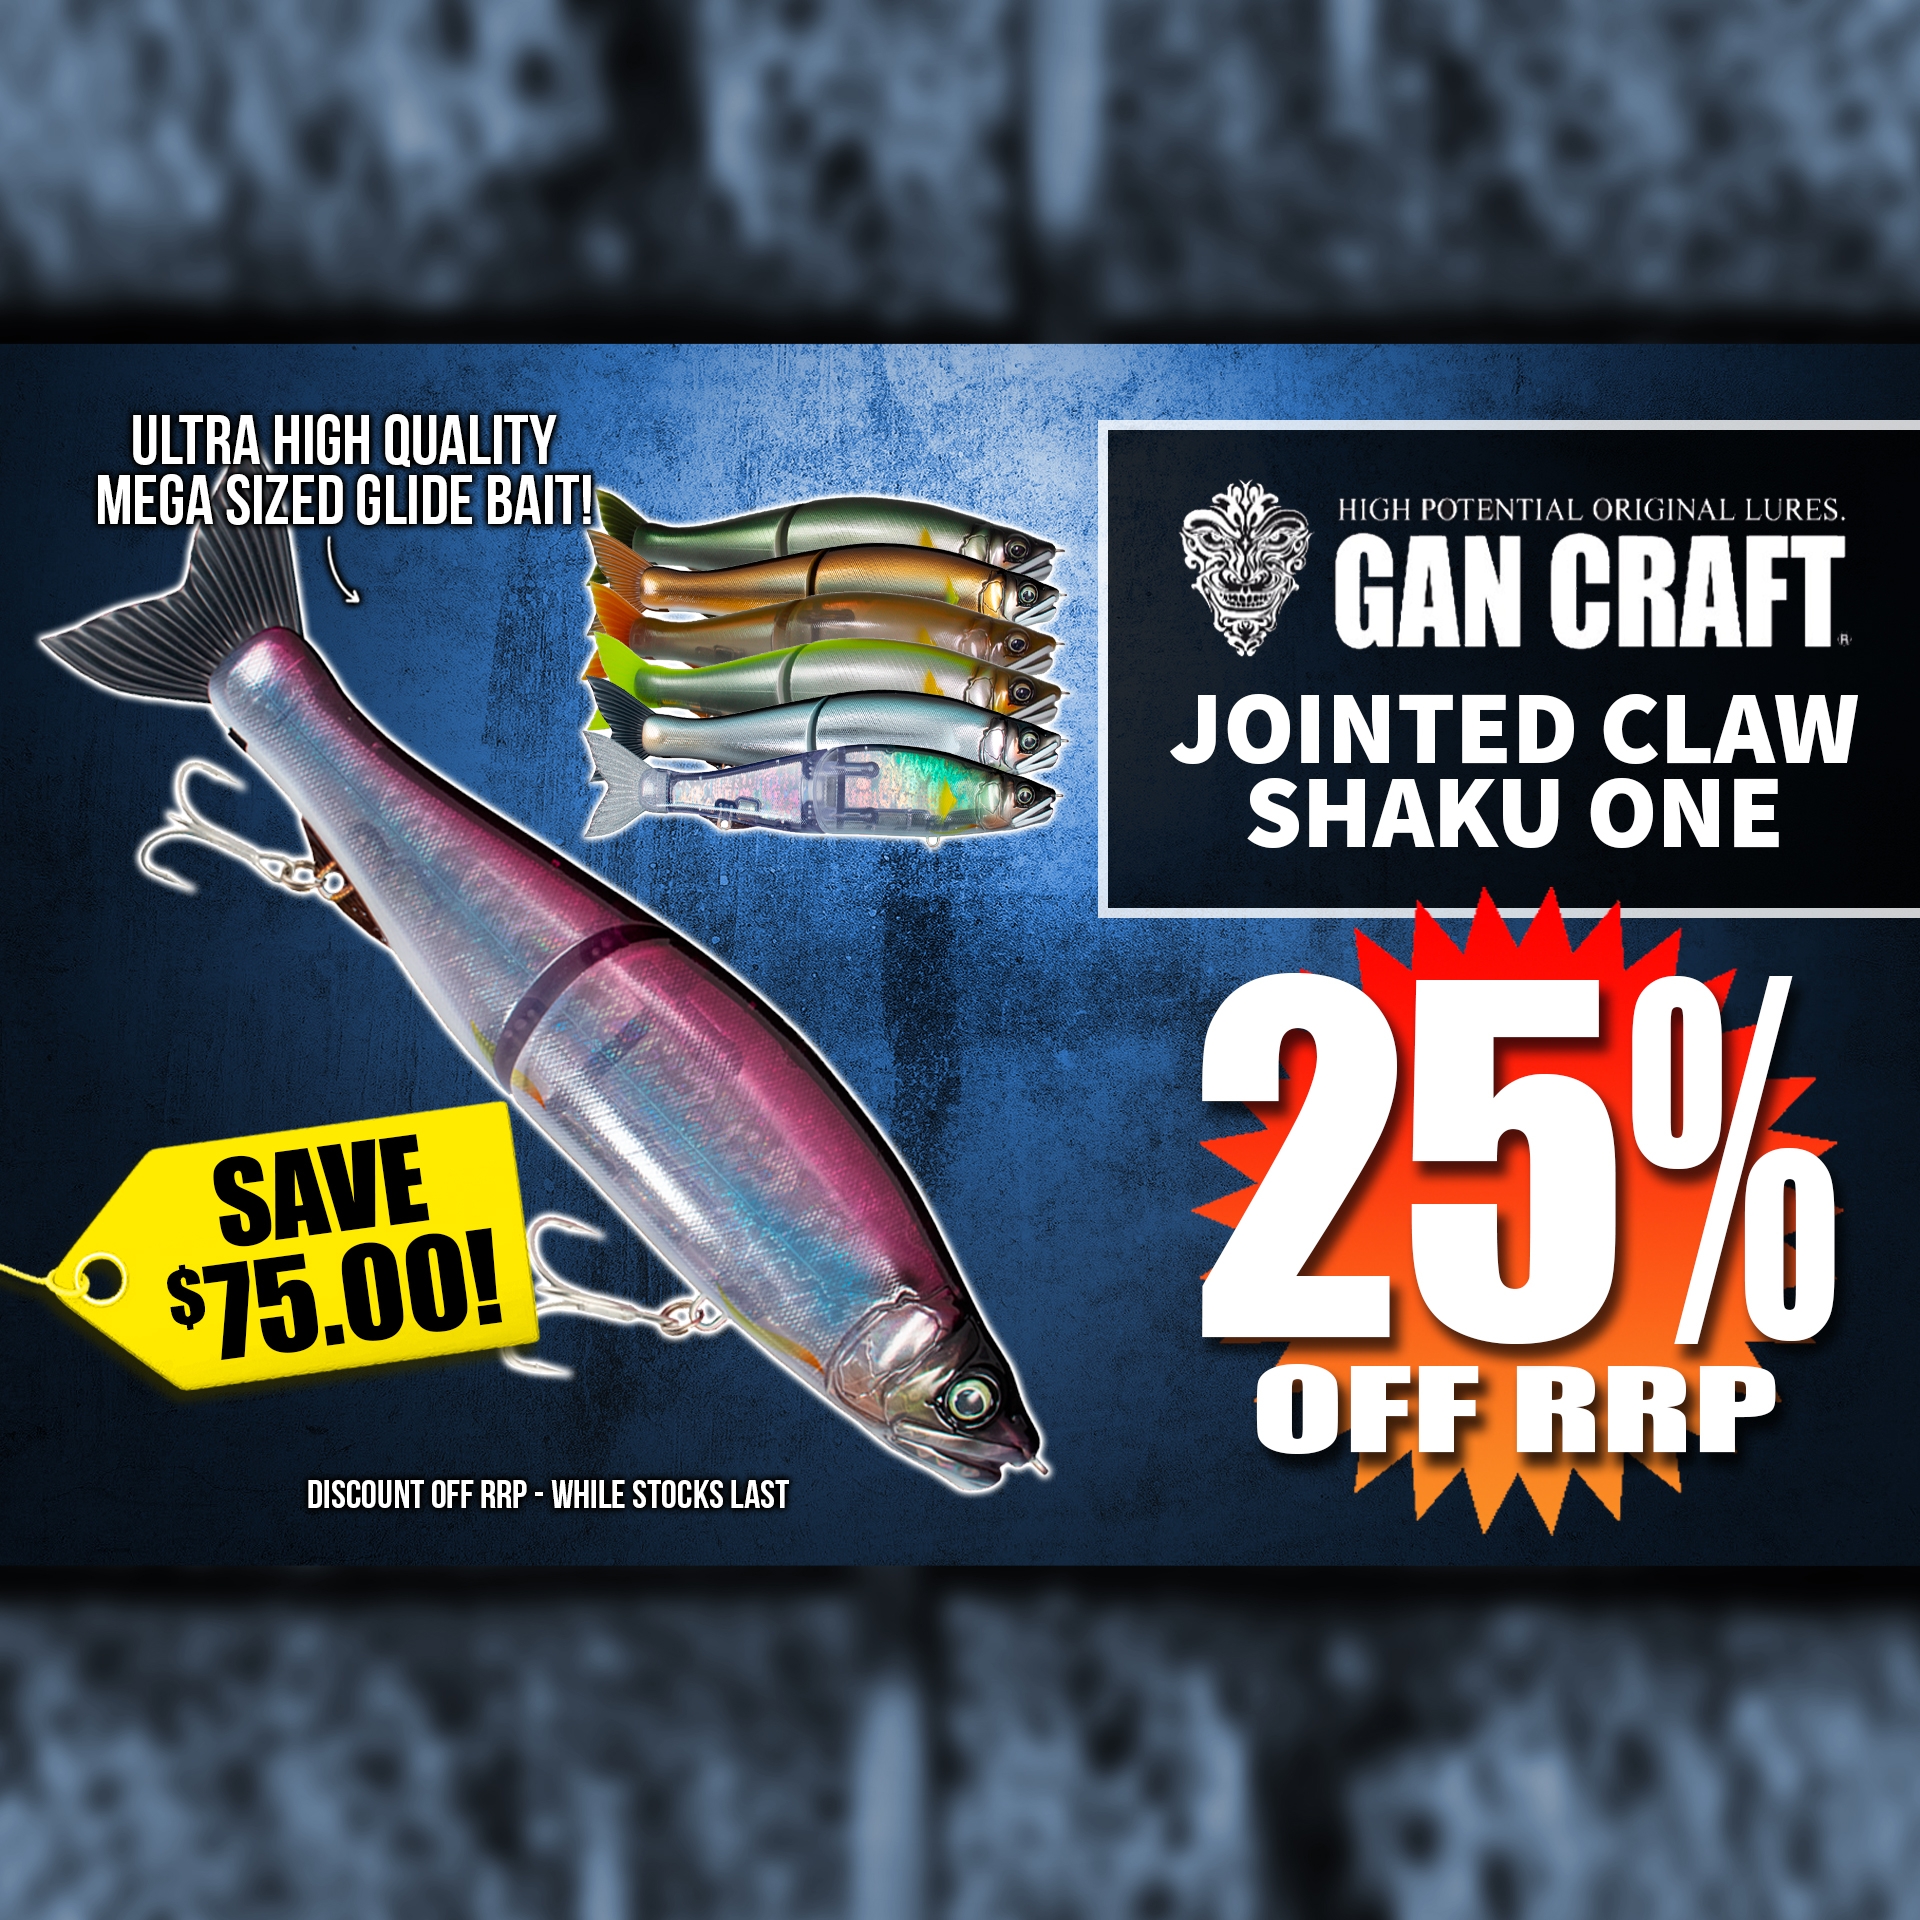 25% off GAN CRAFT JOINTED CLAW SHAKU ONE LURE